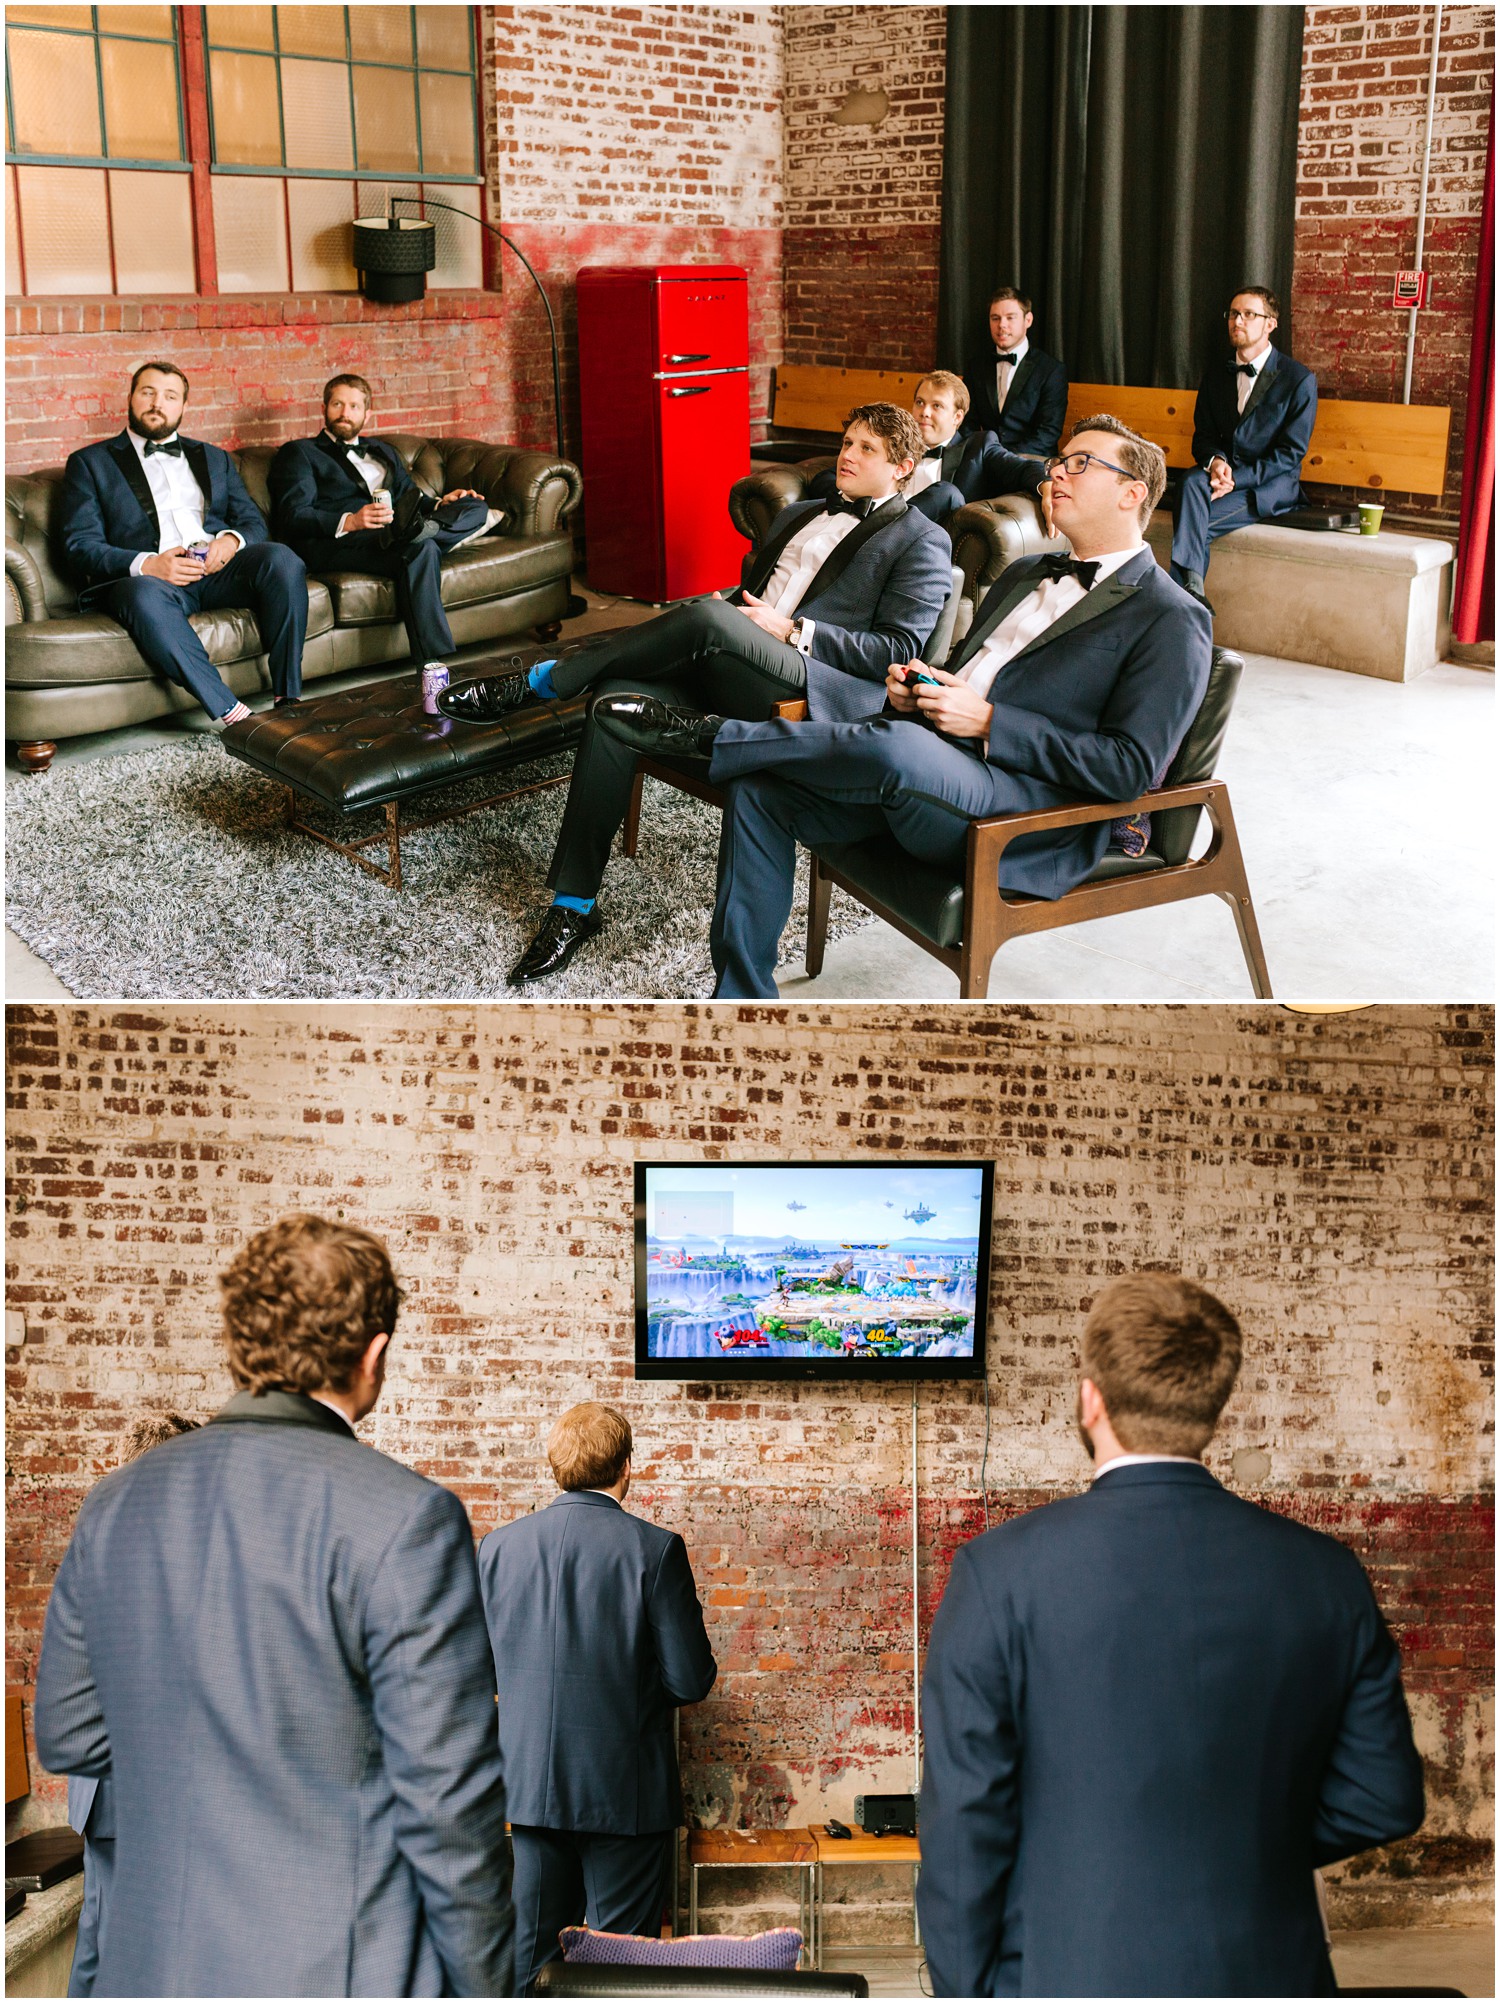 groom and groomsmen watch TV before wedding day at the Cadillac Service Garage